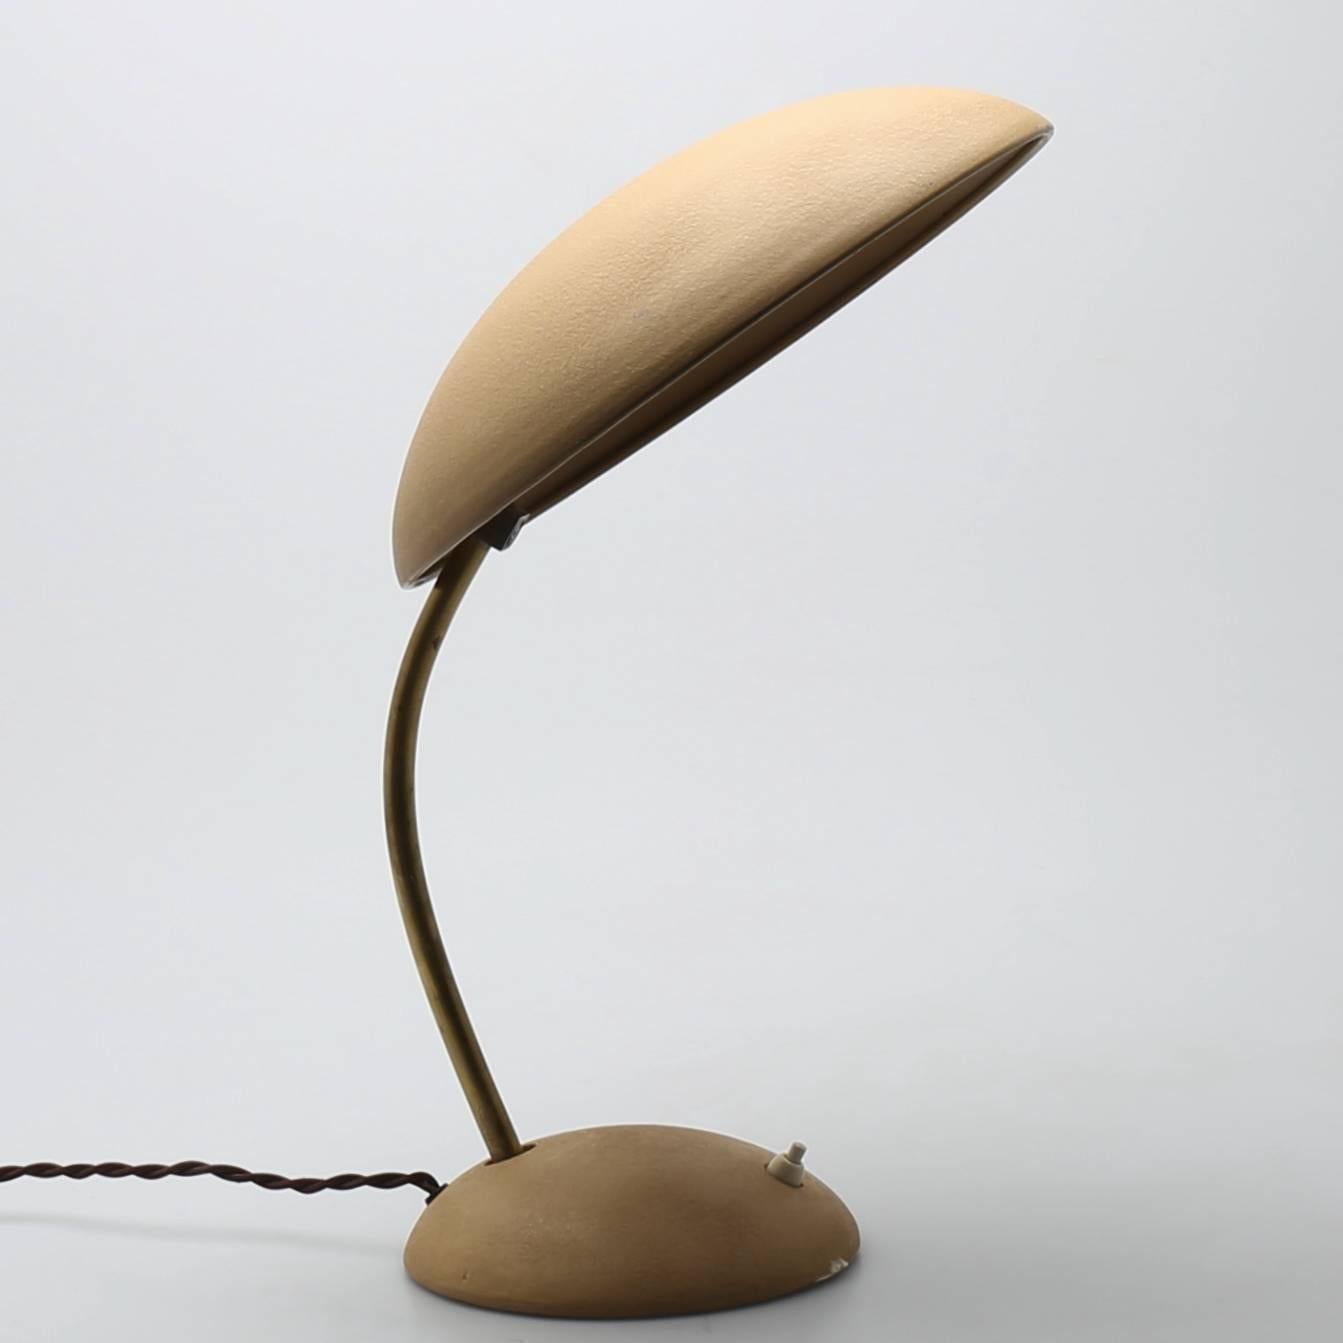 Art Deco Swedish desk lamp manufactured by Elektroskandia. Lacquered shade and base in matte beige tone and flexible brass arm. Height 35-38 cm.